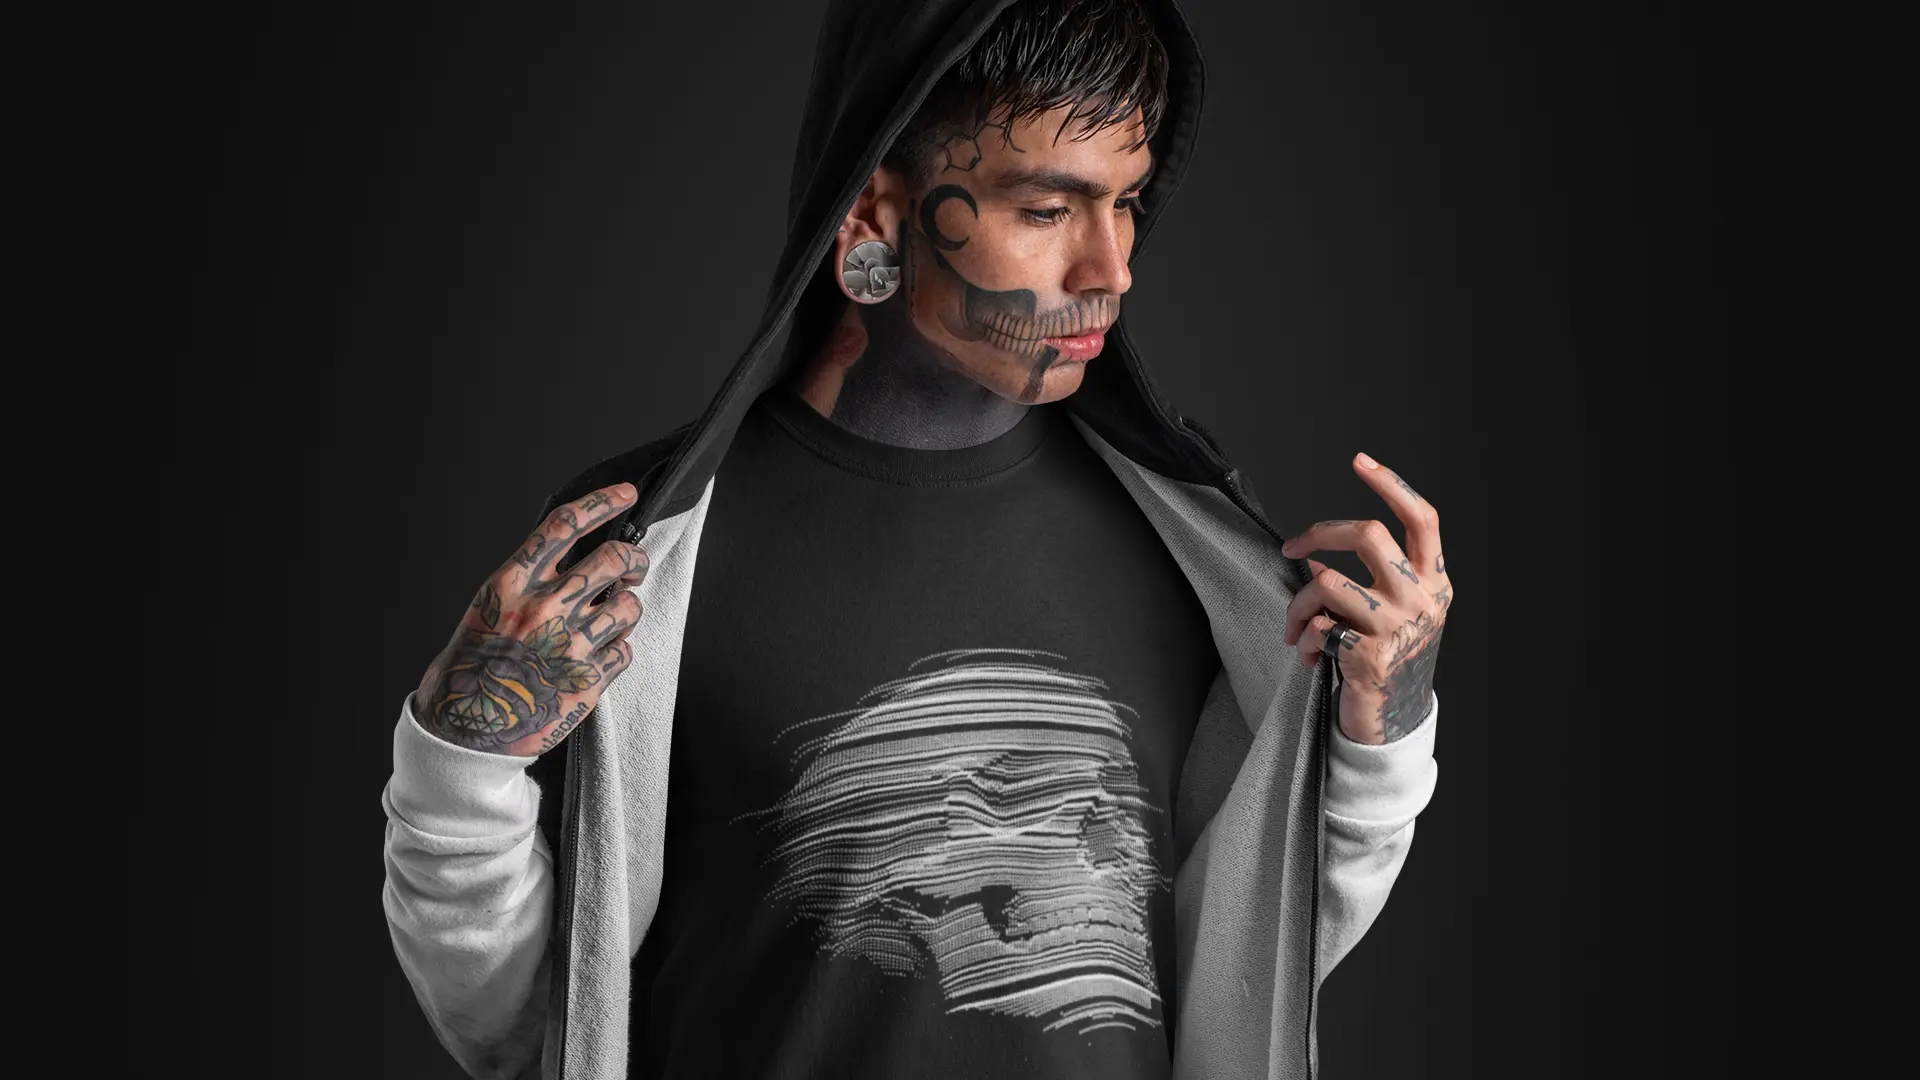 mockup-of-a-goth-man-with-tattoos-on-his-face-wearing-a-t-shirt-under-a-hoodie-26595